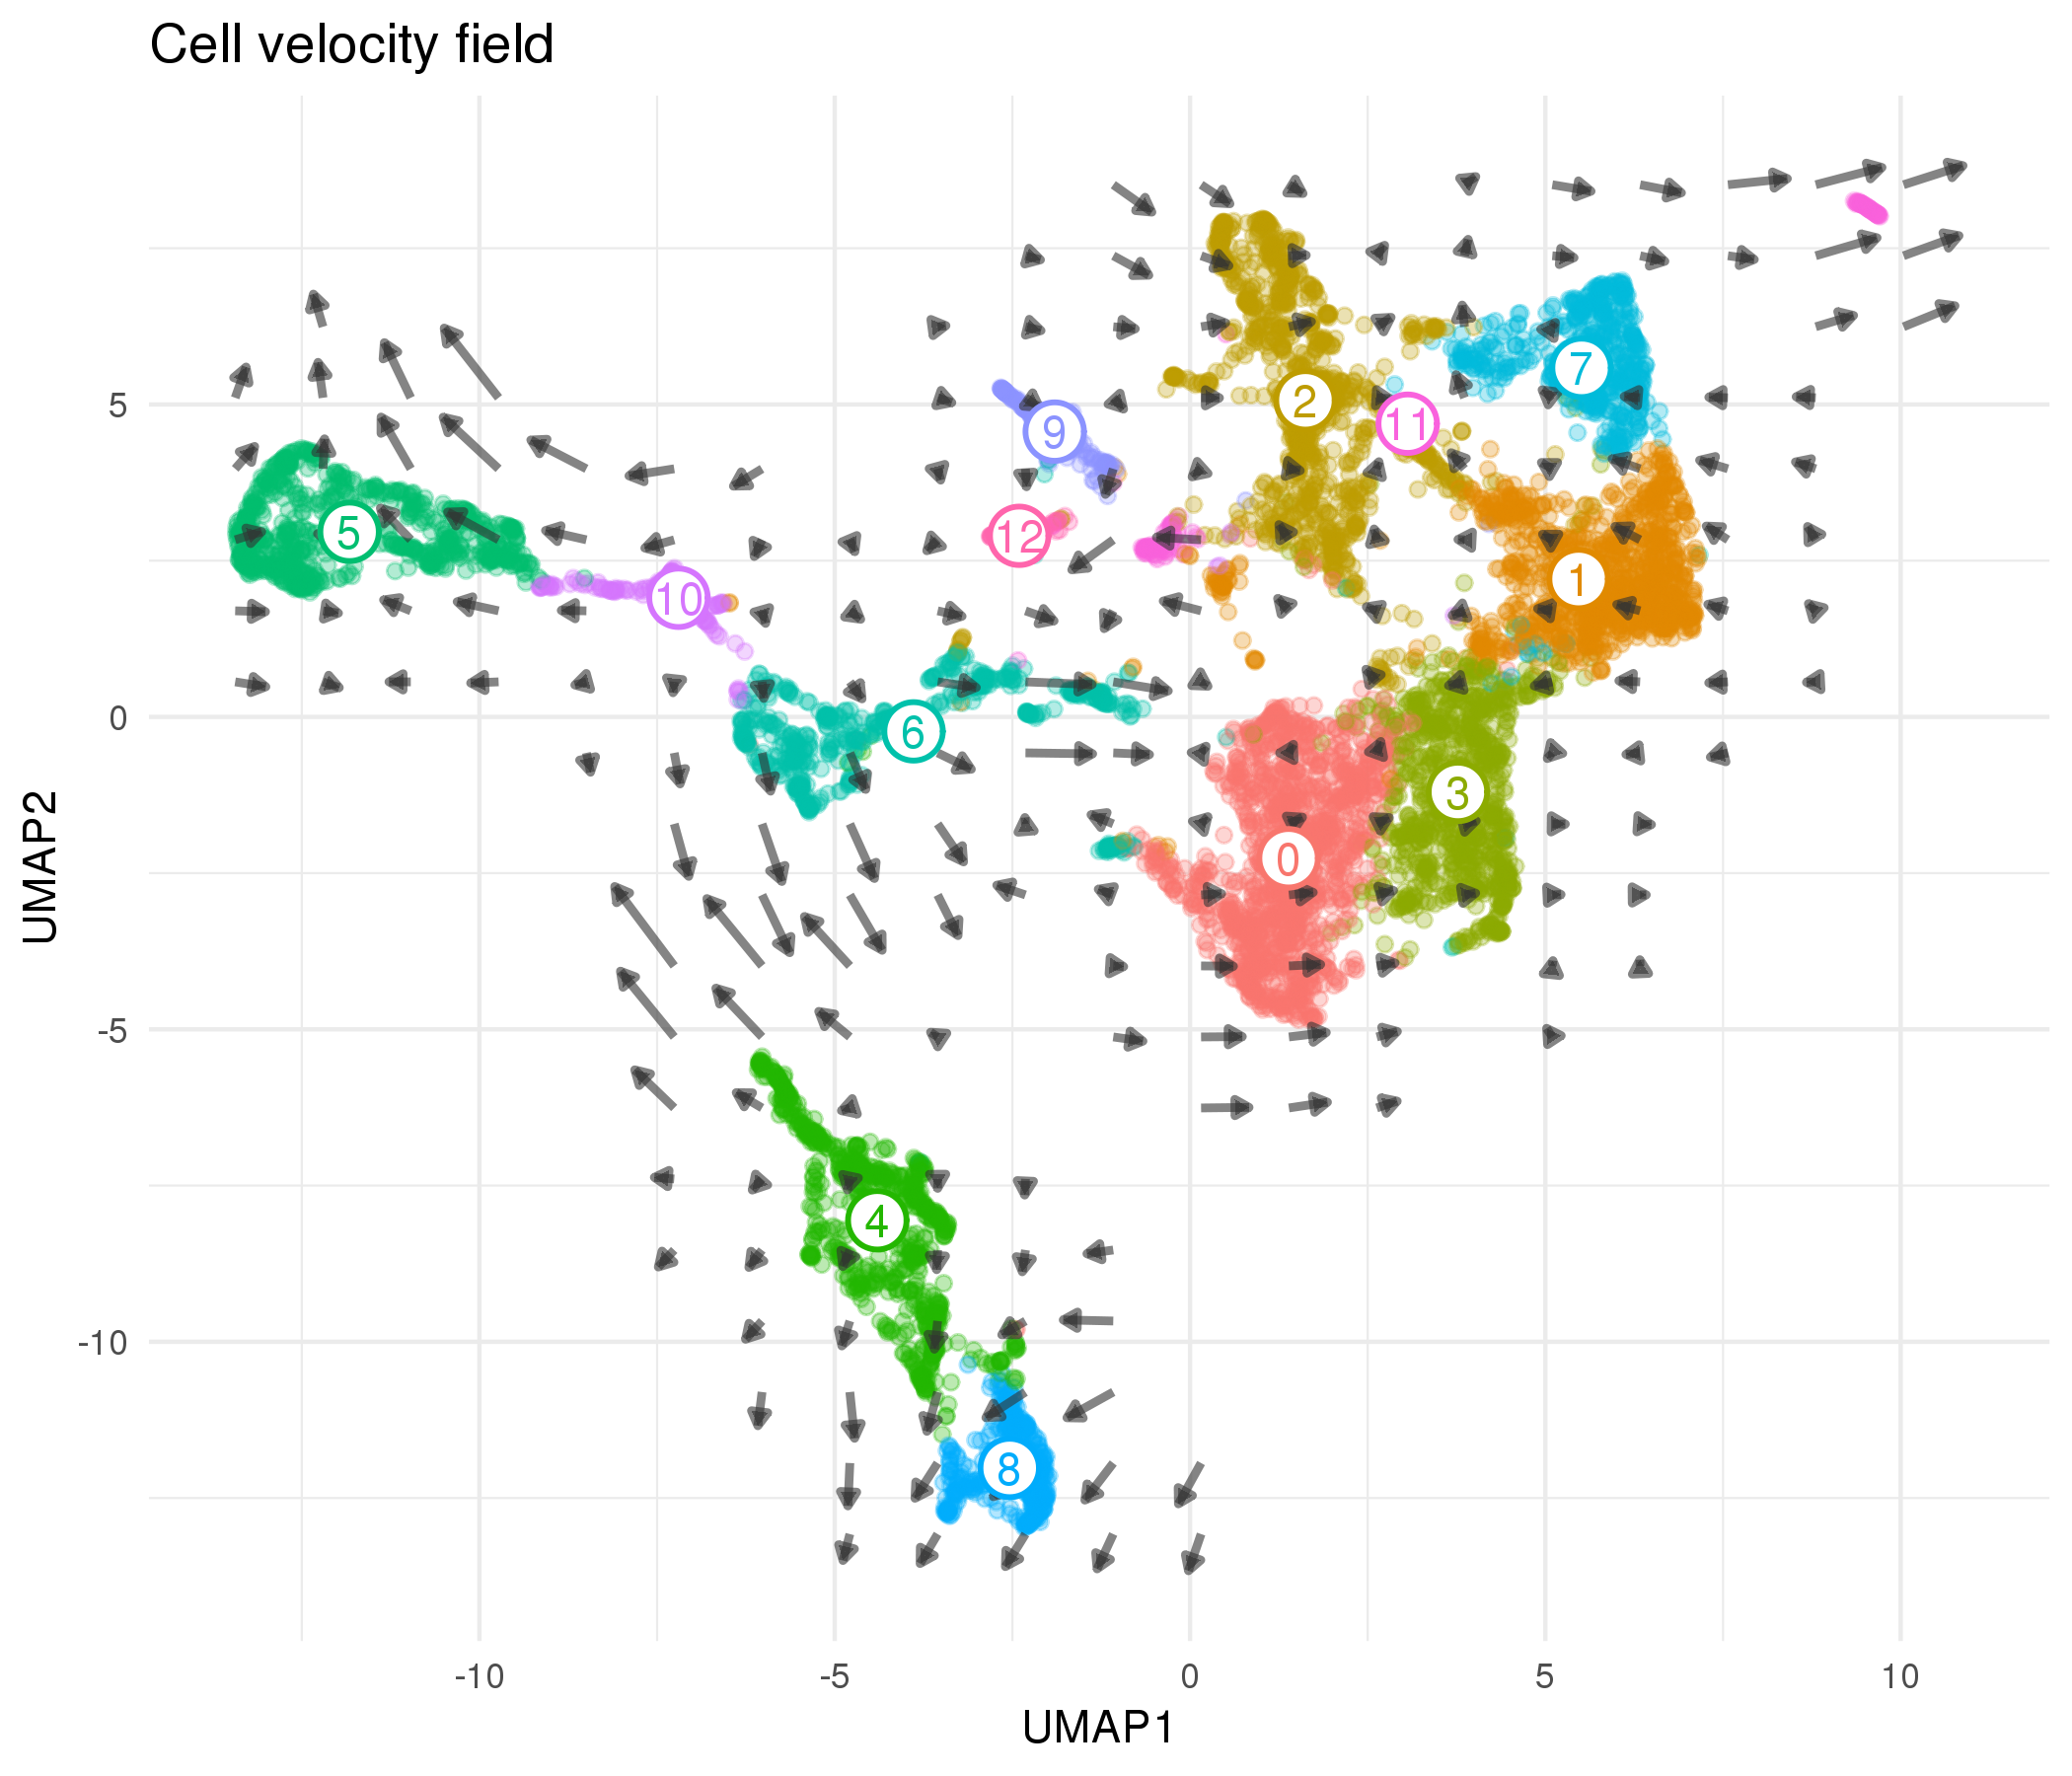 Cell velocity field calculated by velocyto. Points show cells in UMAP space coloured according to cluster. Arrows show the average velocity for cells in each region of a grid, with direction indicating the transcriptional profile cells are headed towards and length giving the rate of change.